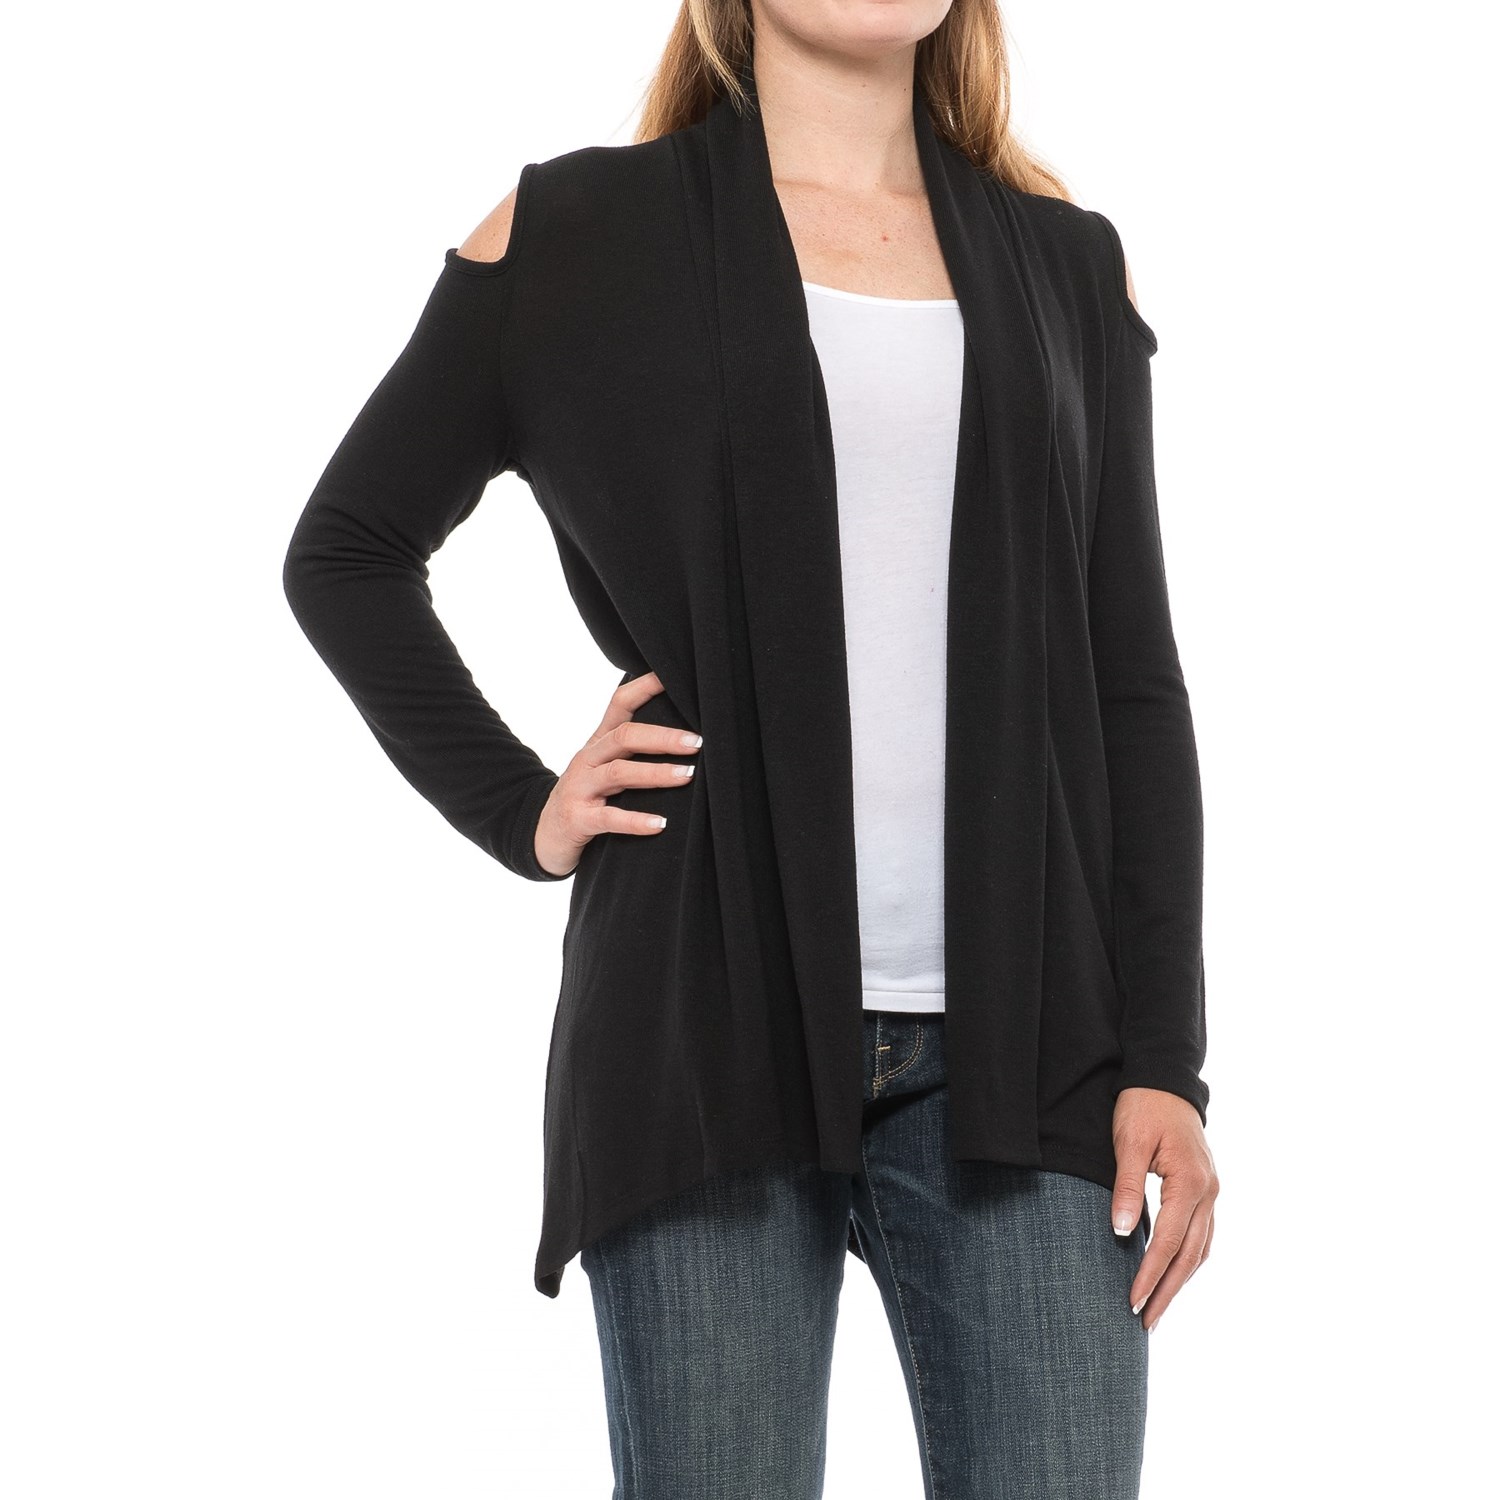 August Silk Cold Shoulder Open-Front Cardigan Sweater (For Women)